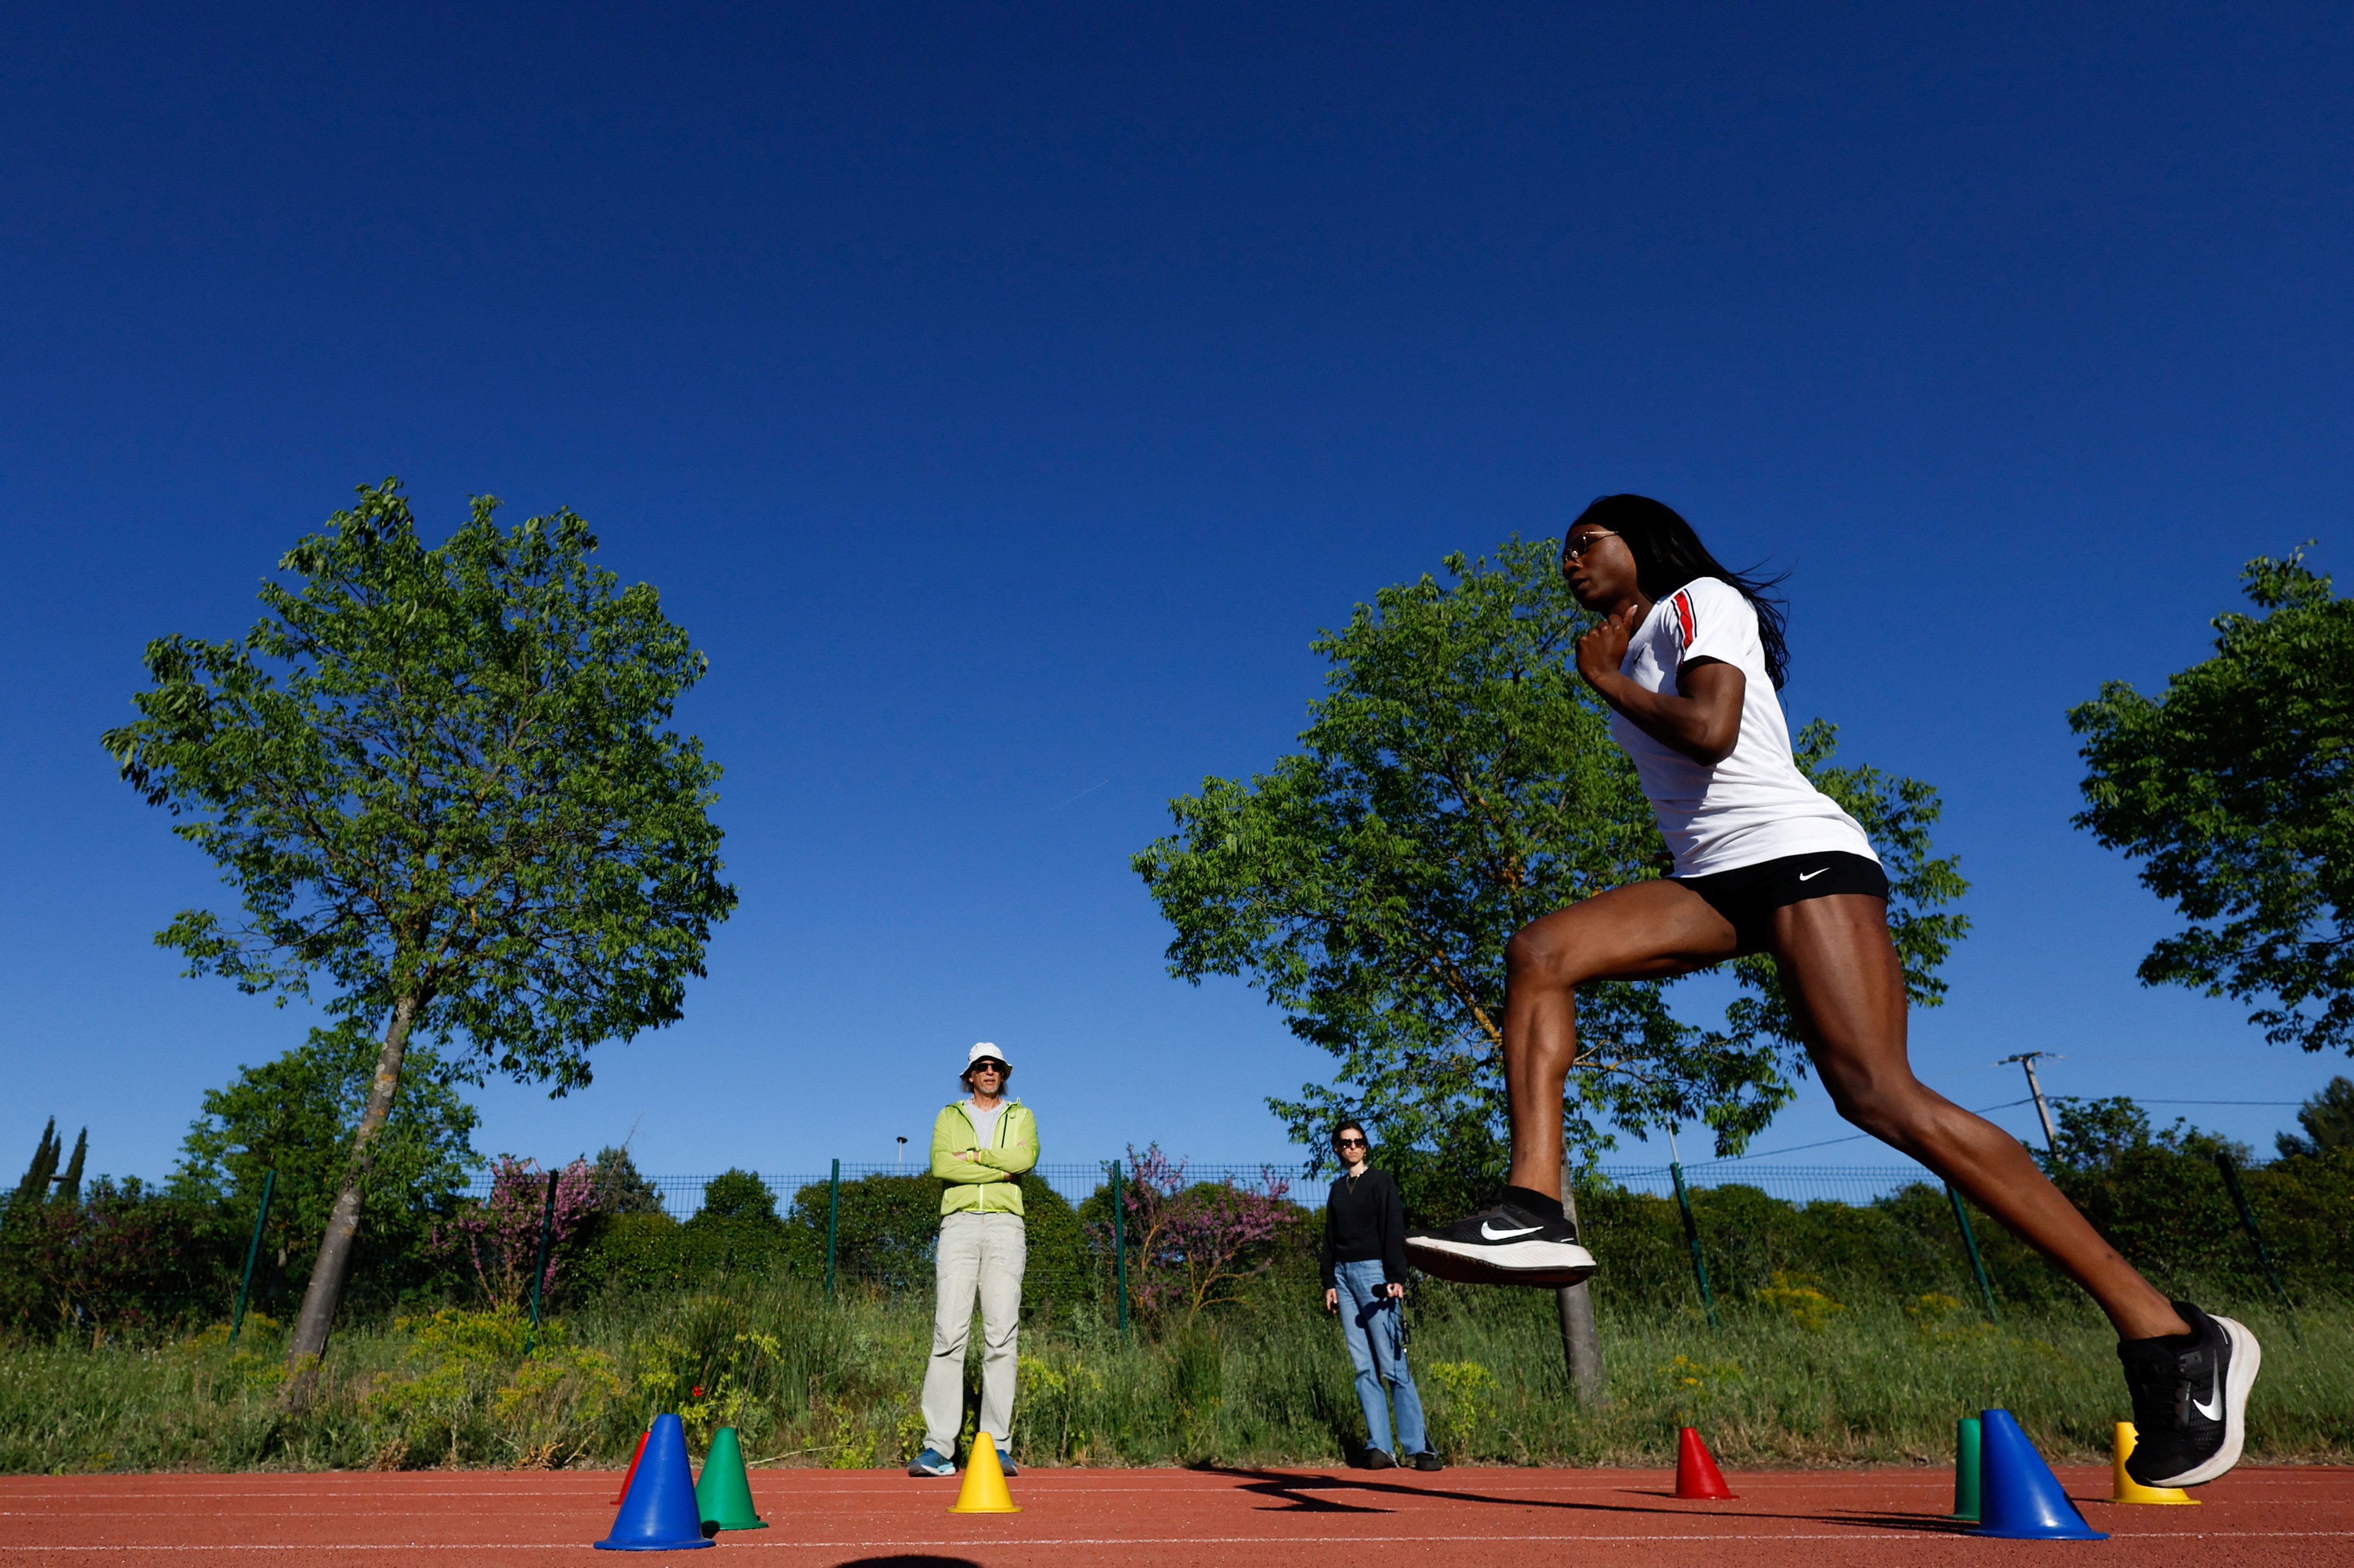 French transgender woman sprinter Halba Diouf attends a practice session in Aix-en-Provence, France on May 3. The physiological and cognitive differences between men and women should not be dismissed. Photo: Reuters 